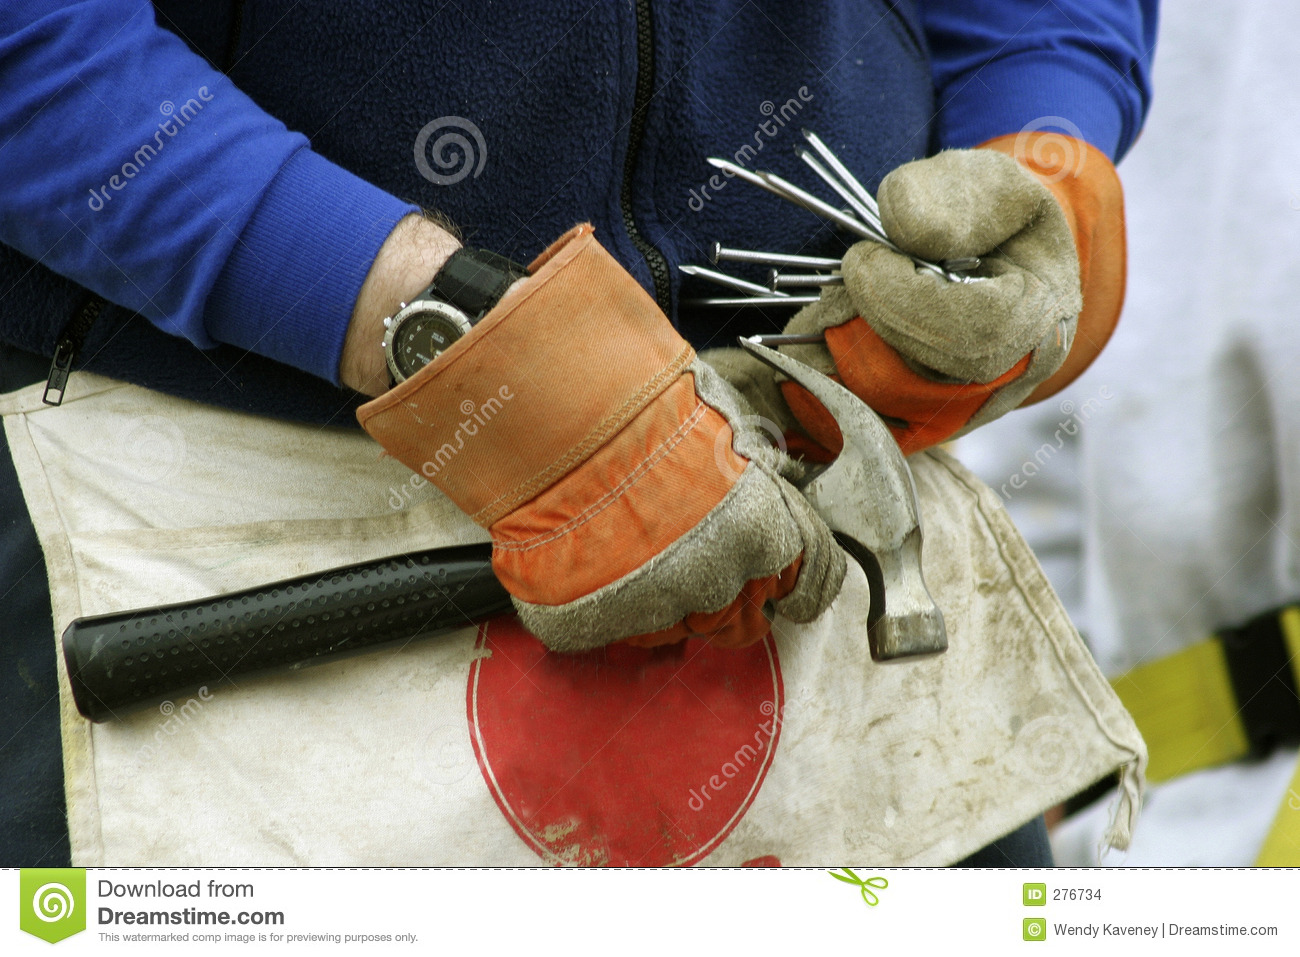 Pair Of Gloved Hands Holding A Hammer And Filling Work Apron Pockets